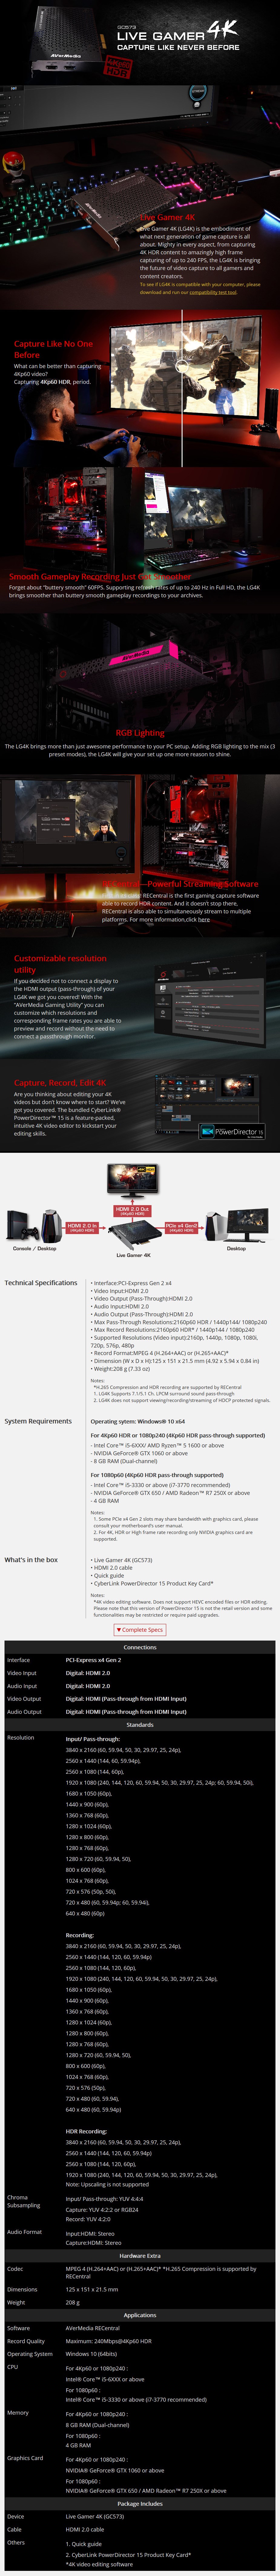 A large marketing image providing additional information about the product AVerMedia GC573 Live Gamer 4K RGB PCI-E Capture Card - Additional alt info not provided